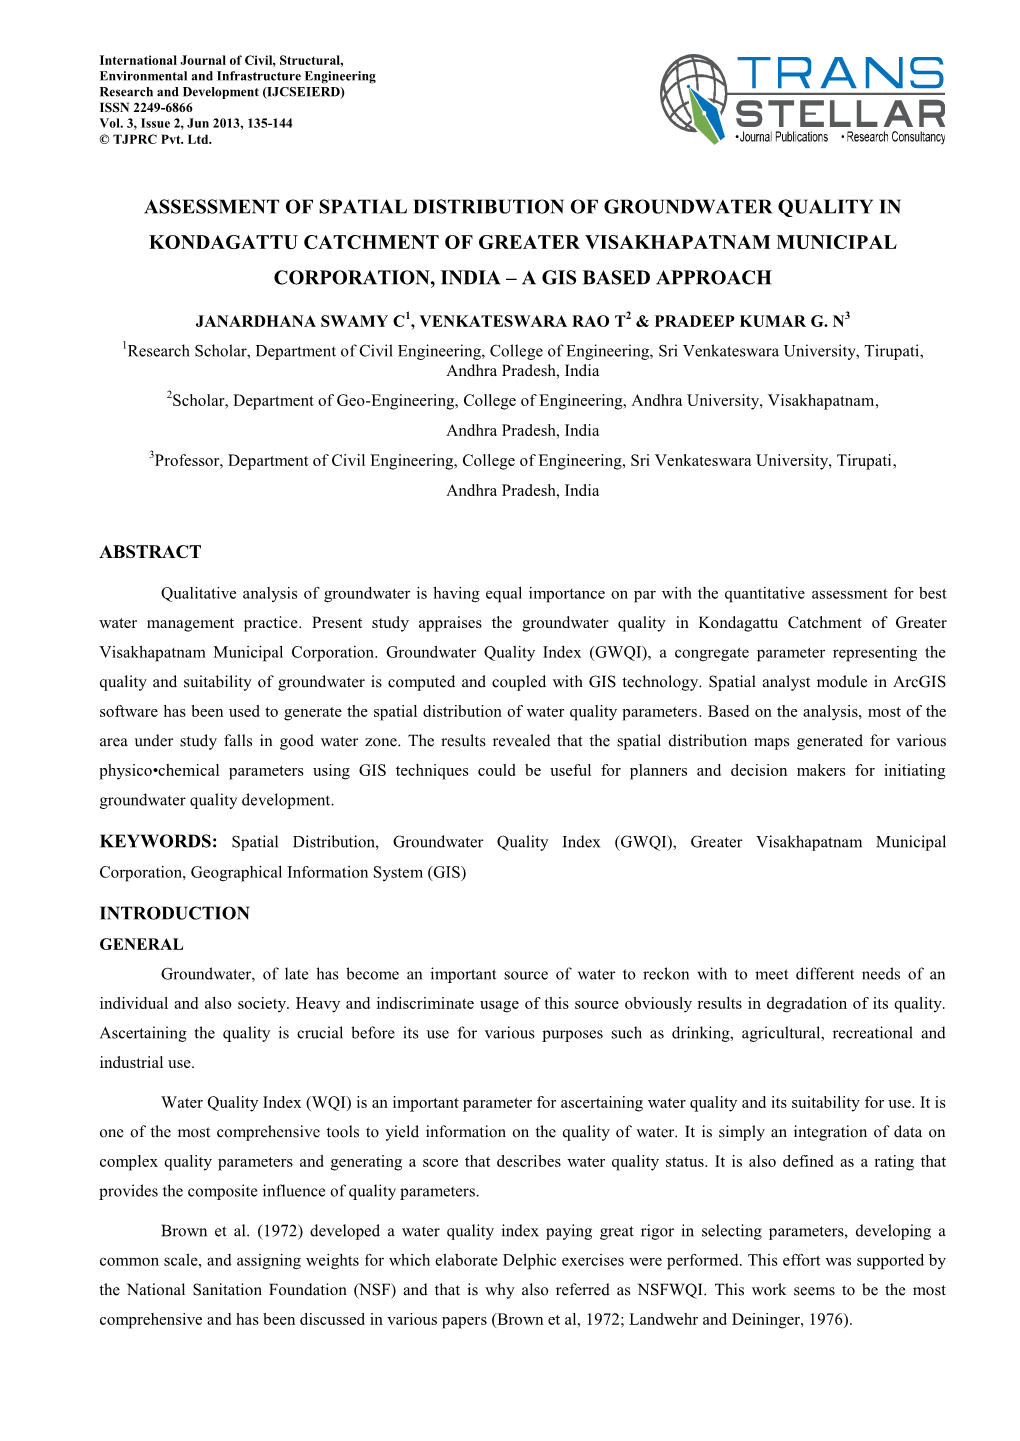 Assessment of Spatial Distribution of Groundwater Quality in Kondagattu Catchment of Greater Visakhapatnam Municipal Corporation, India – a Gis Based Approach